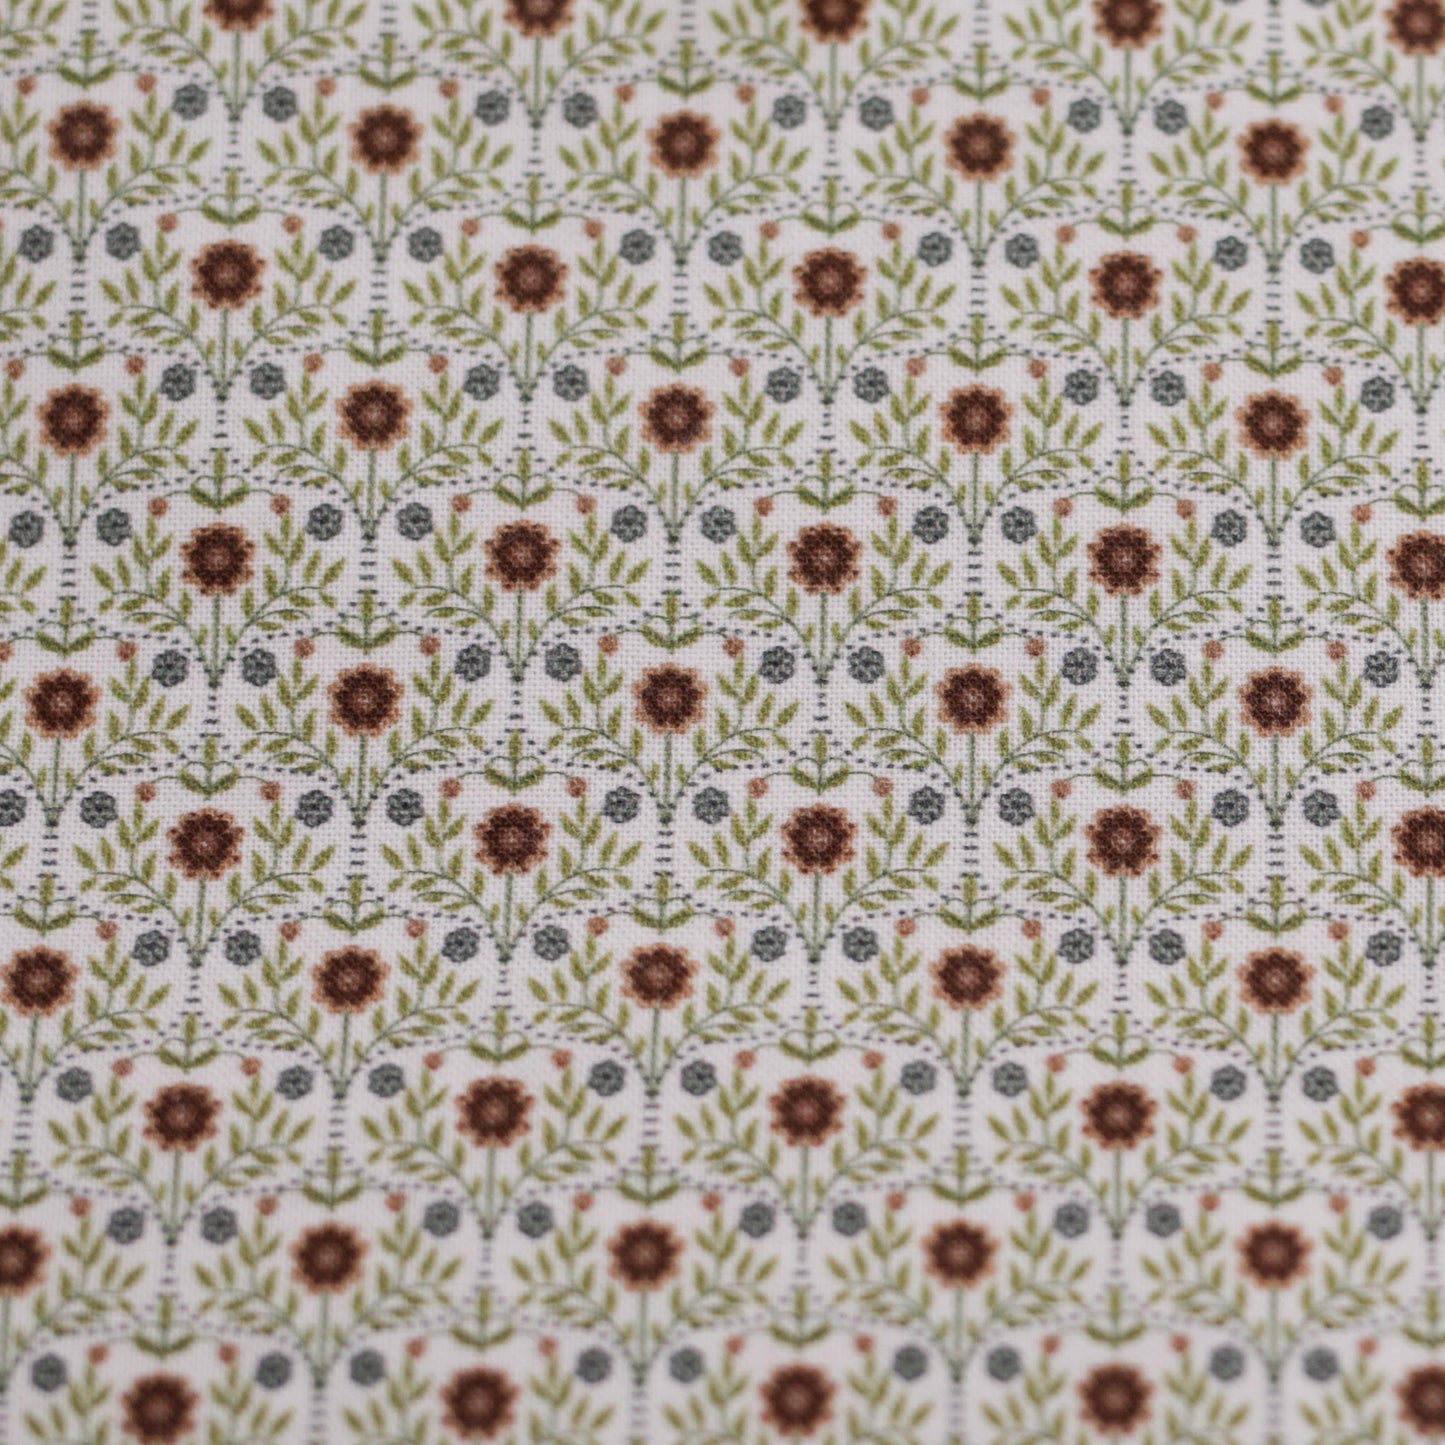 Designer's 100% cotton fabric "Floral ogee"